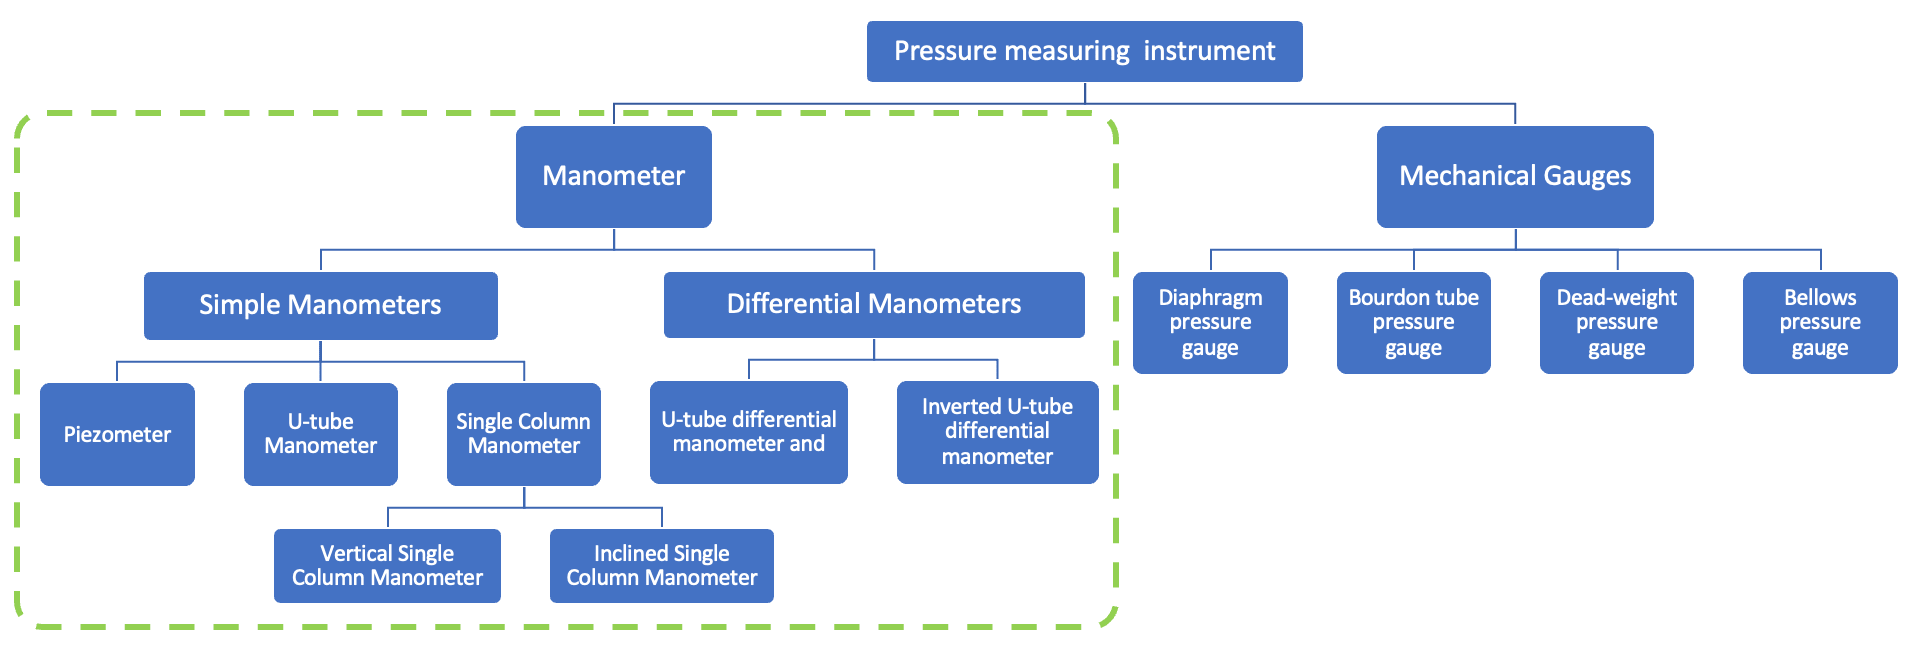 How to Measure the Pressure with Manometers?